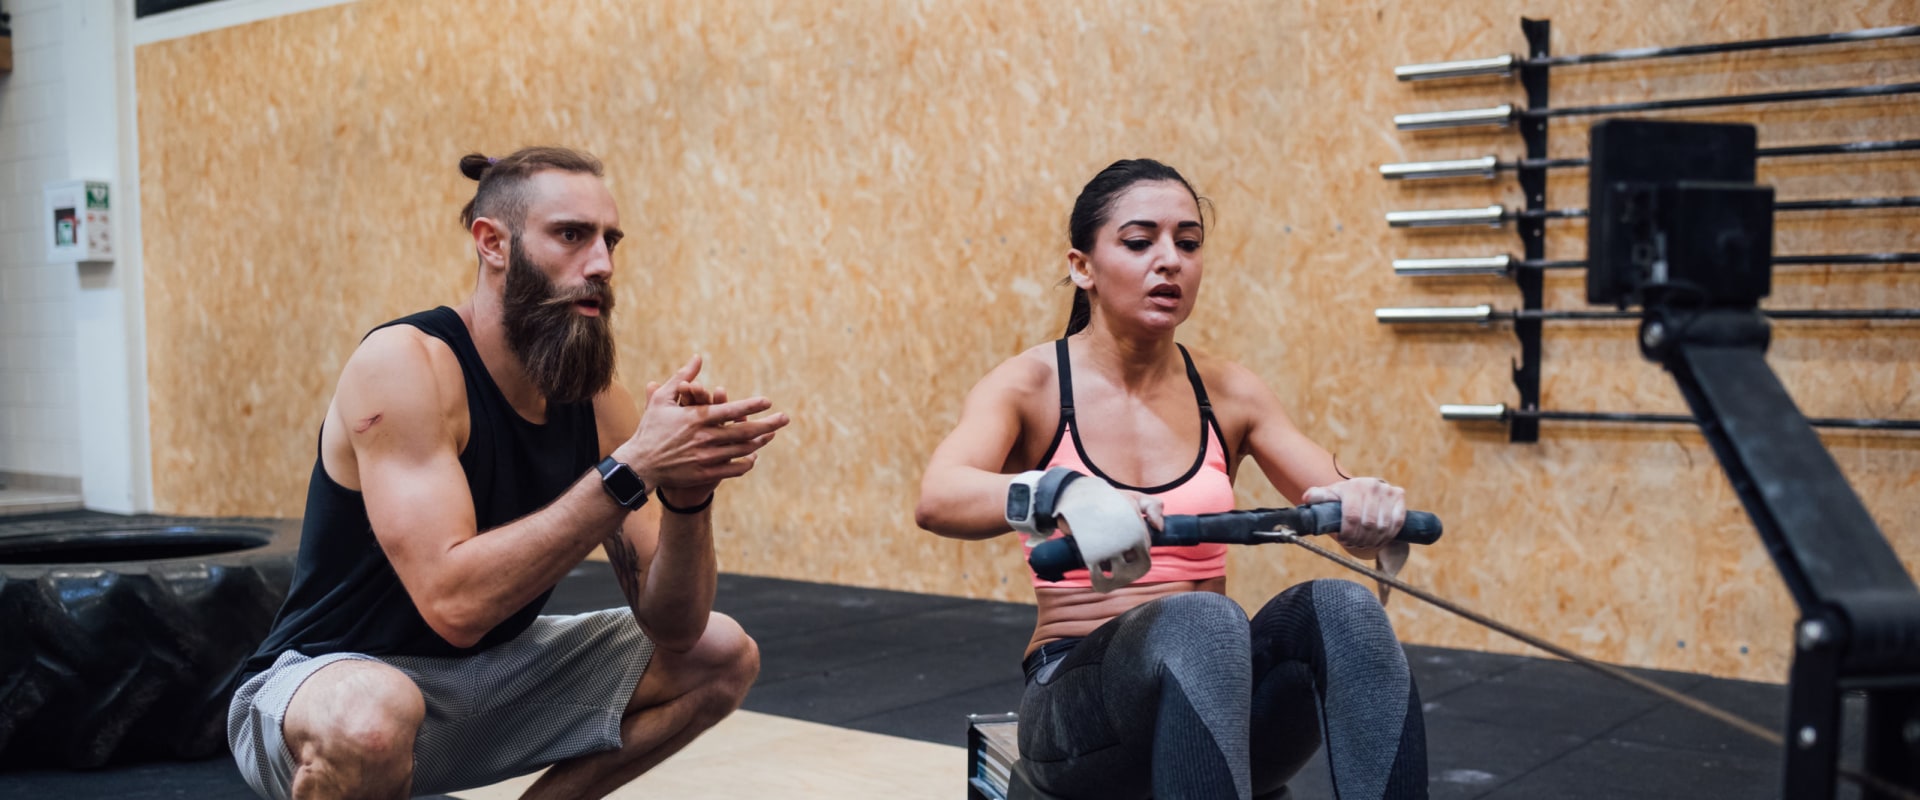 Why people quit being a personal trainer?